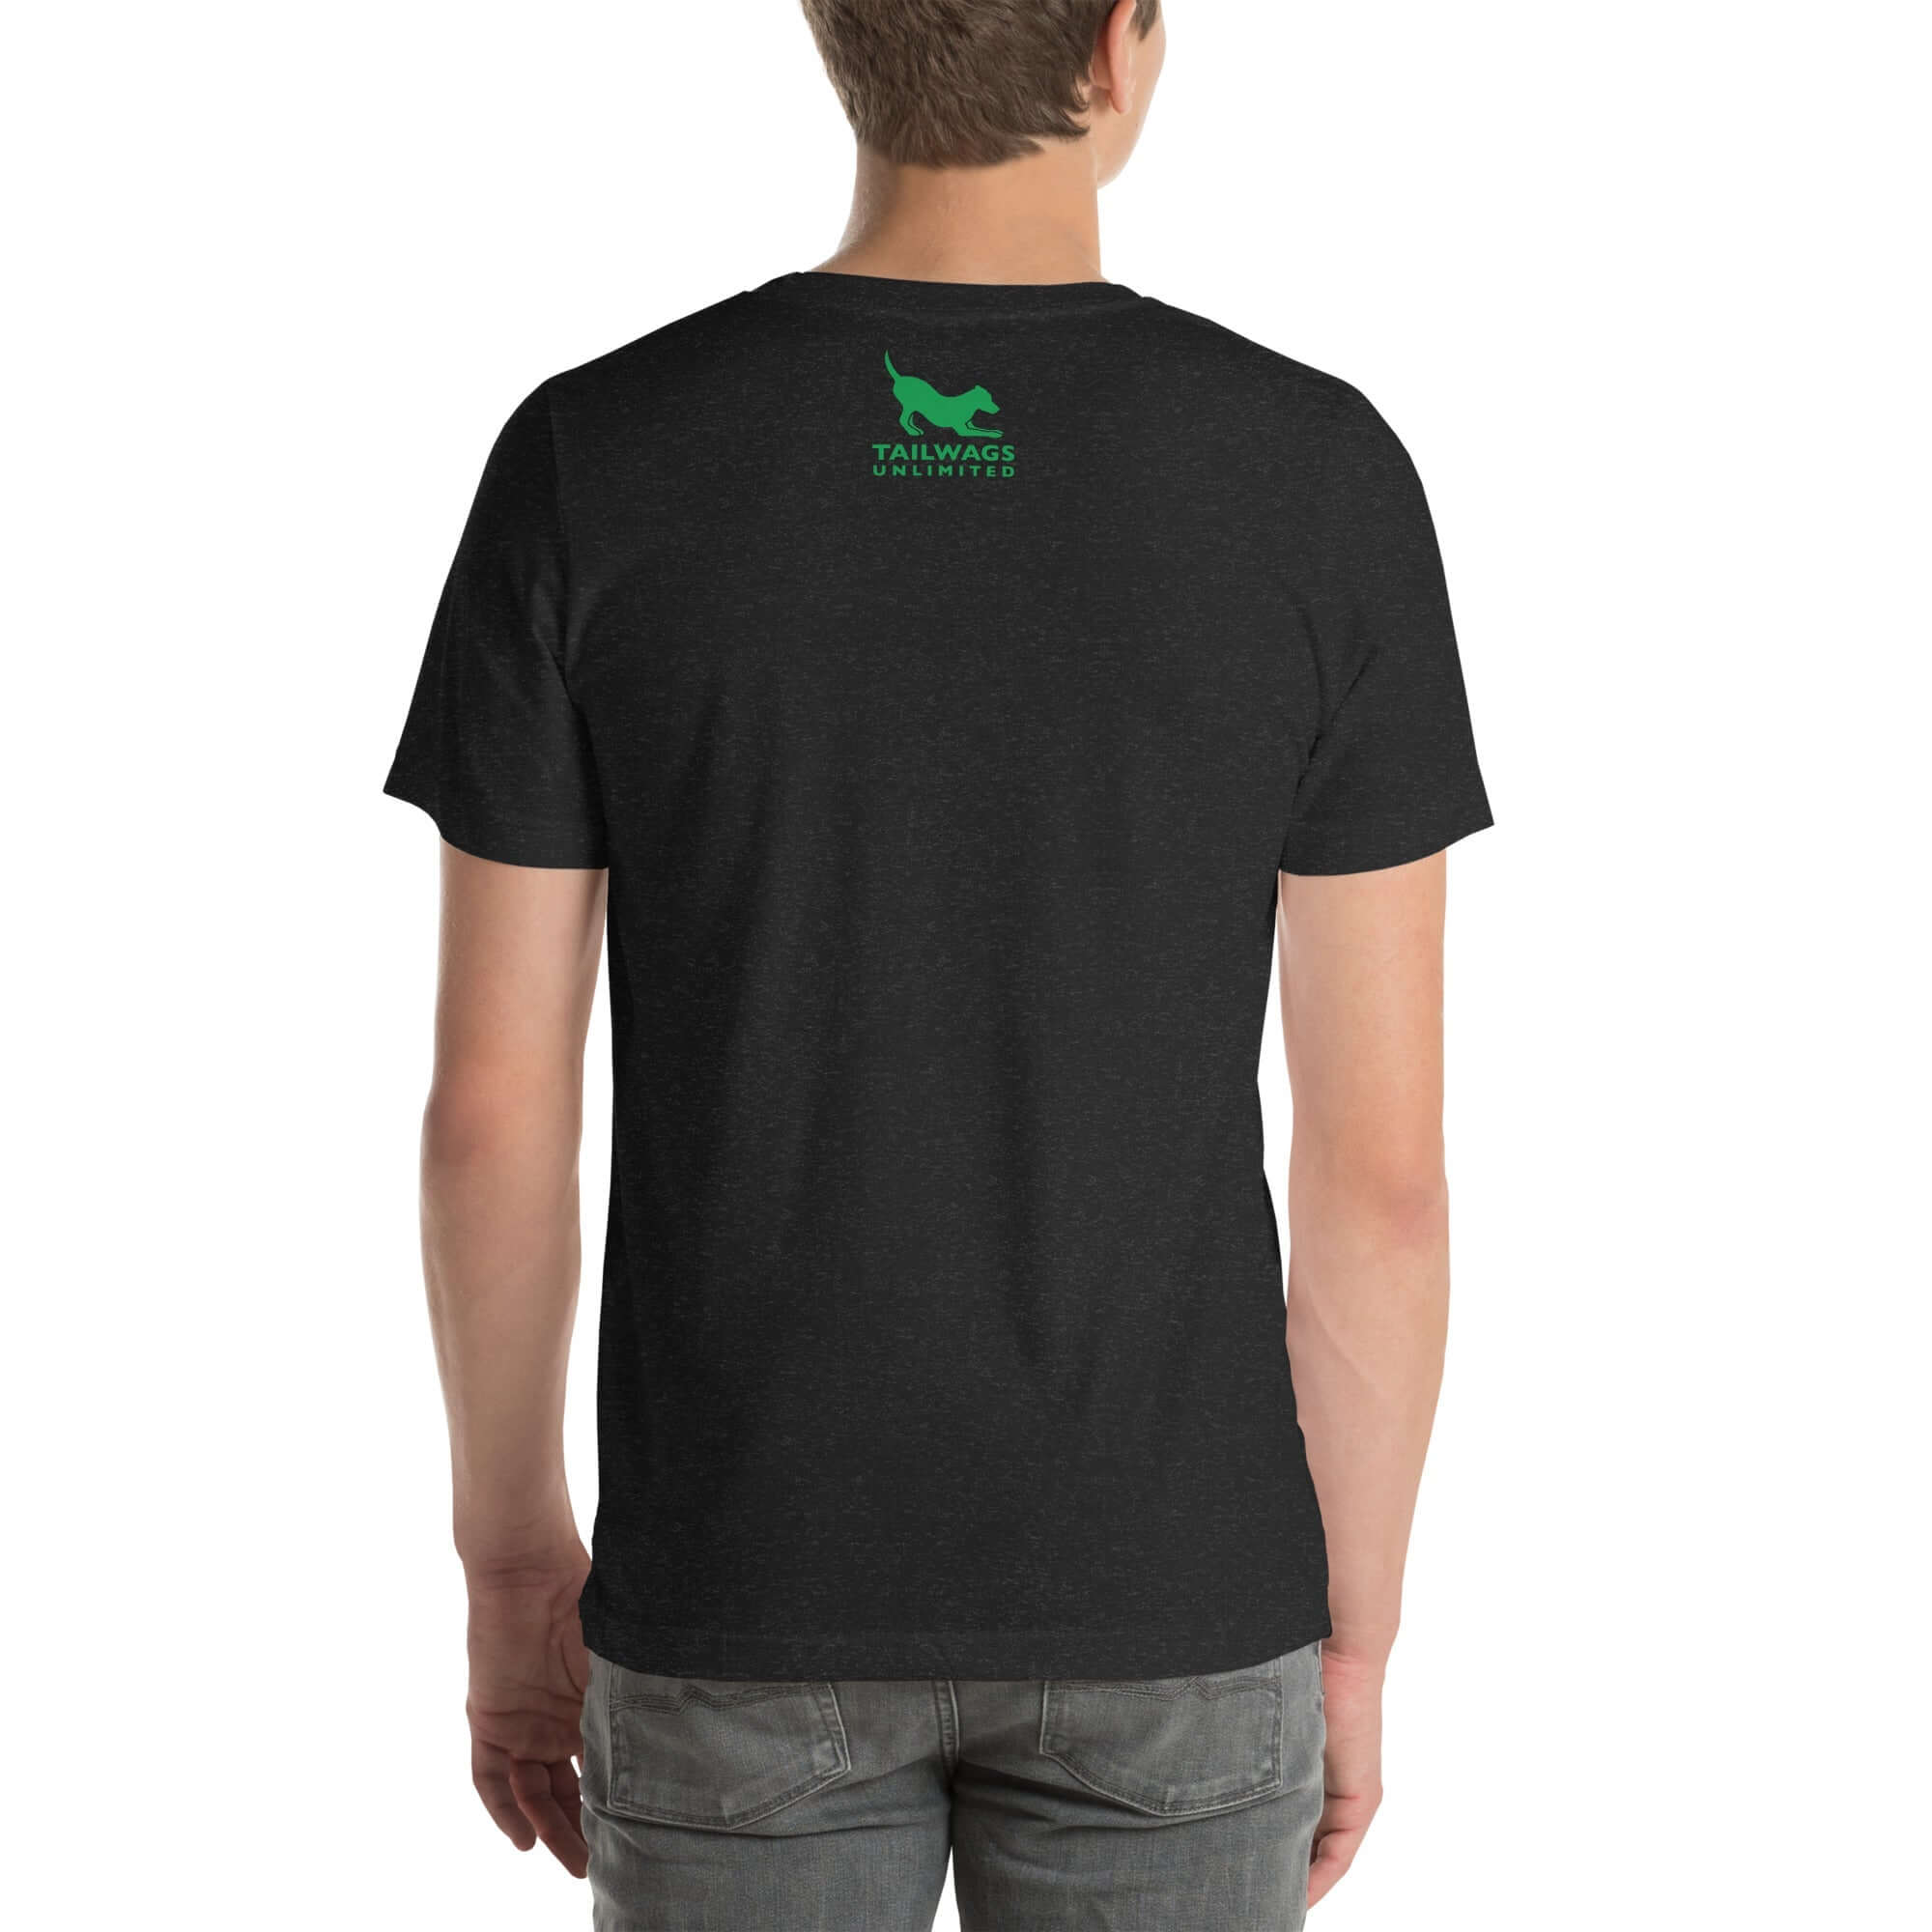 Green Four Leaf Clover Logo T-Shirt - TAILWAGS UNLIMITED